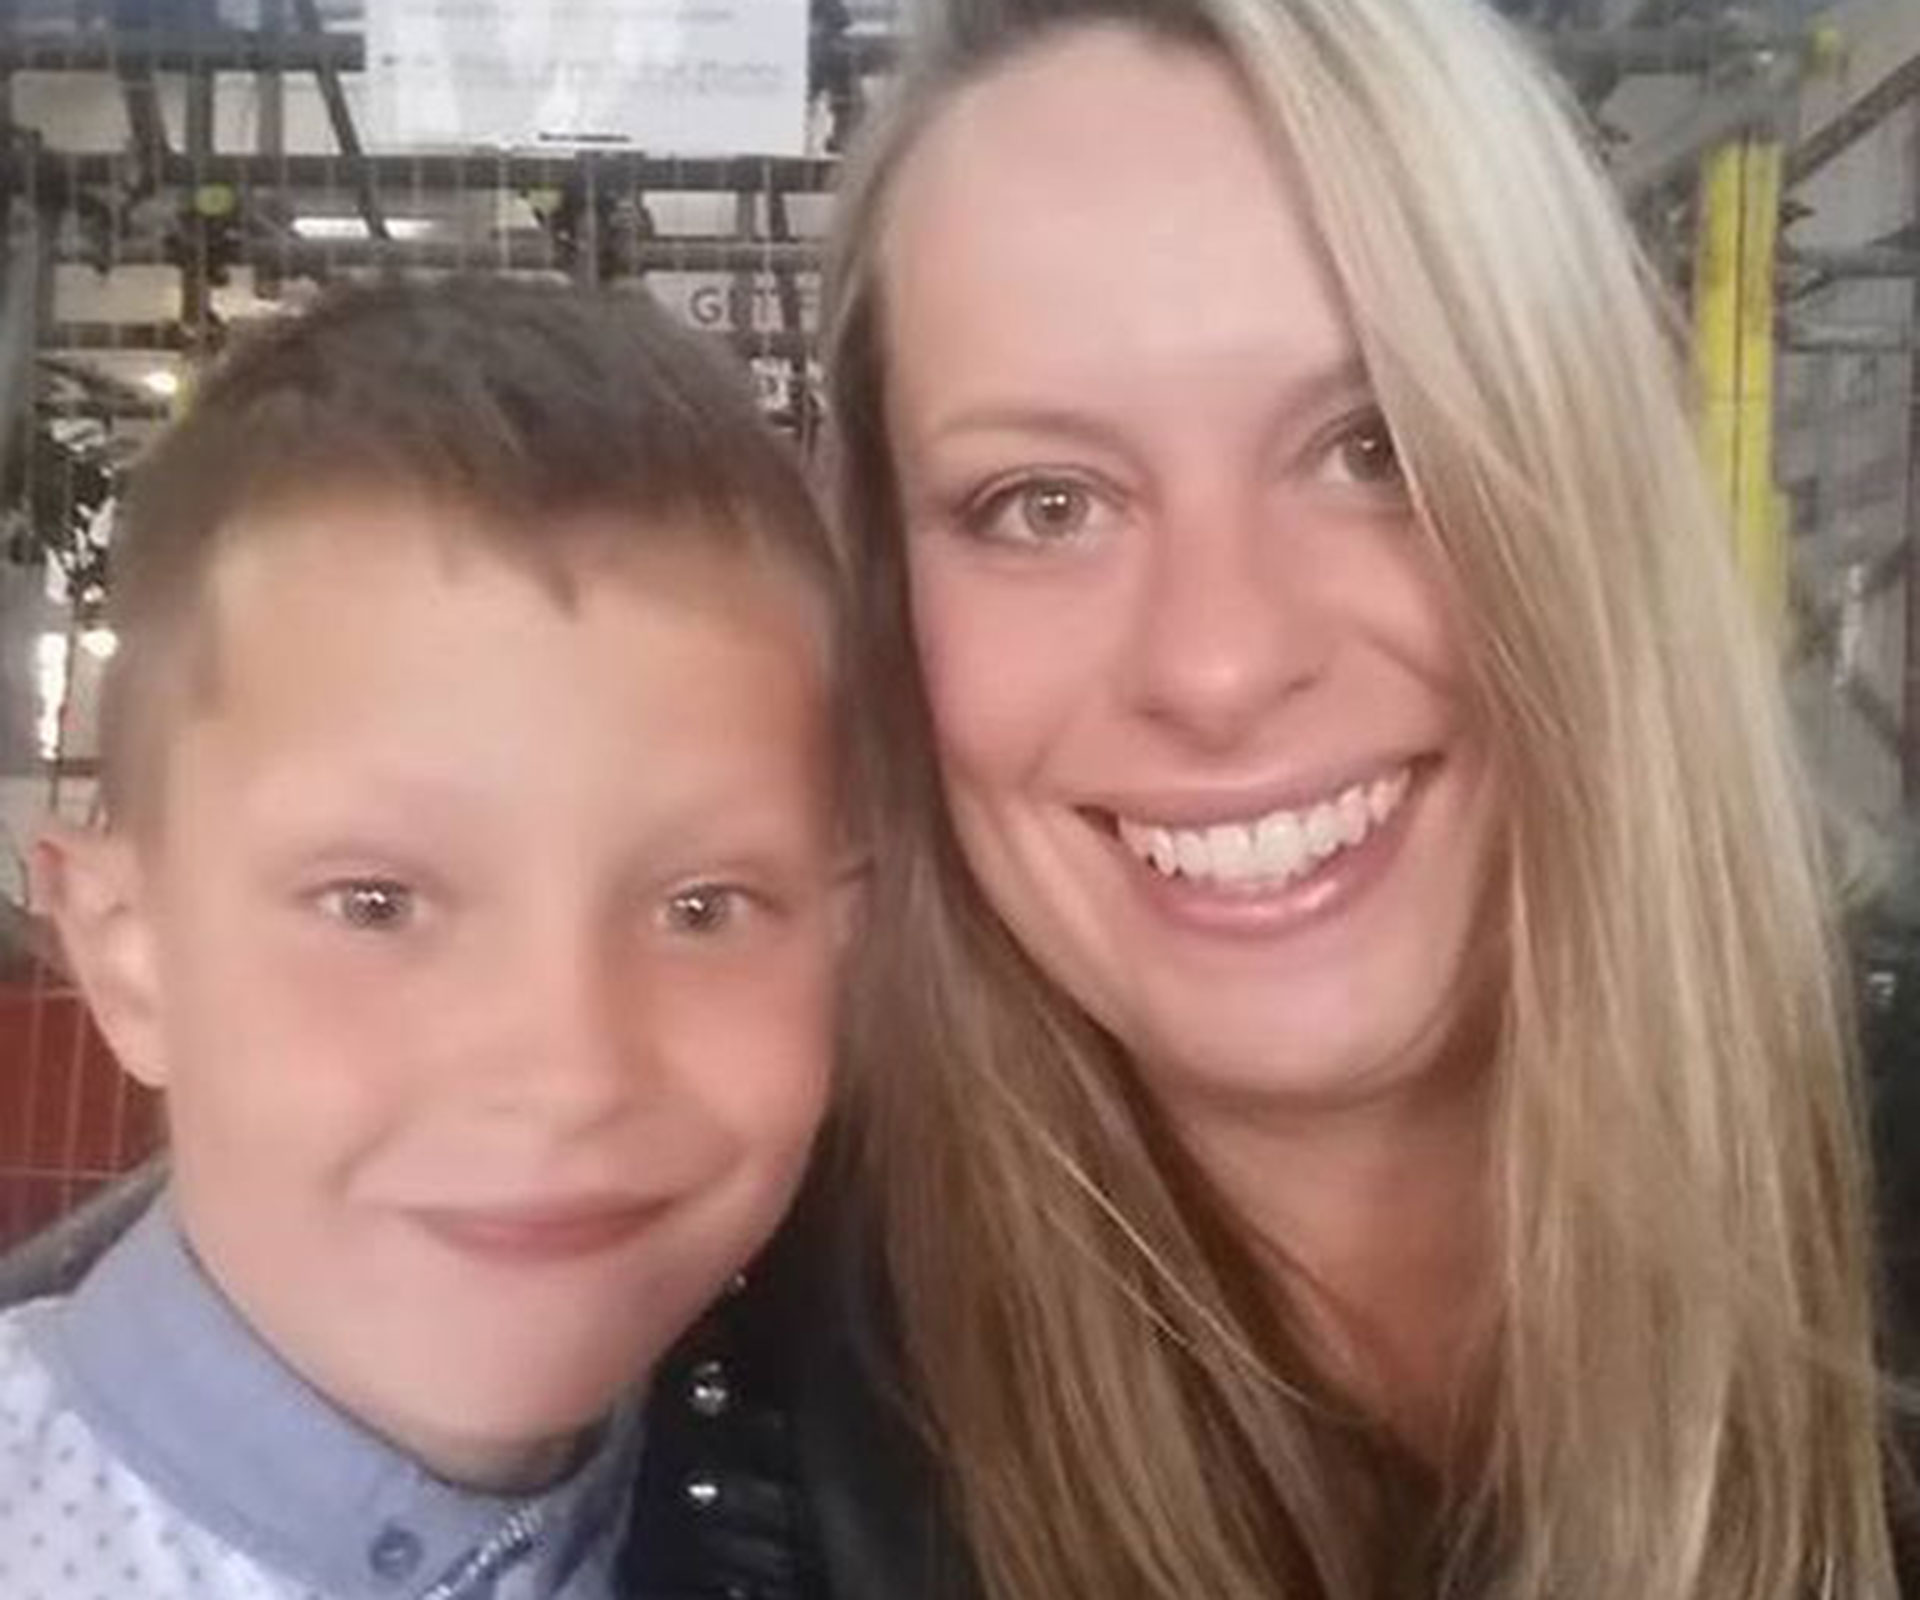 Kelly-Anne Carter takes her life just days after her son was killed in house fire